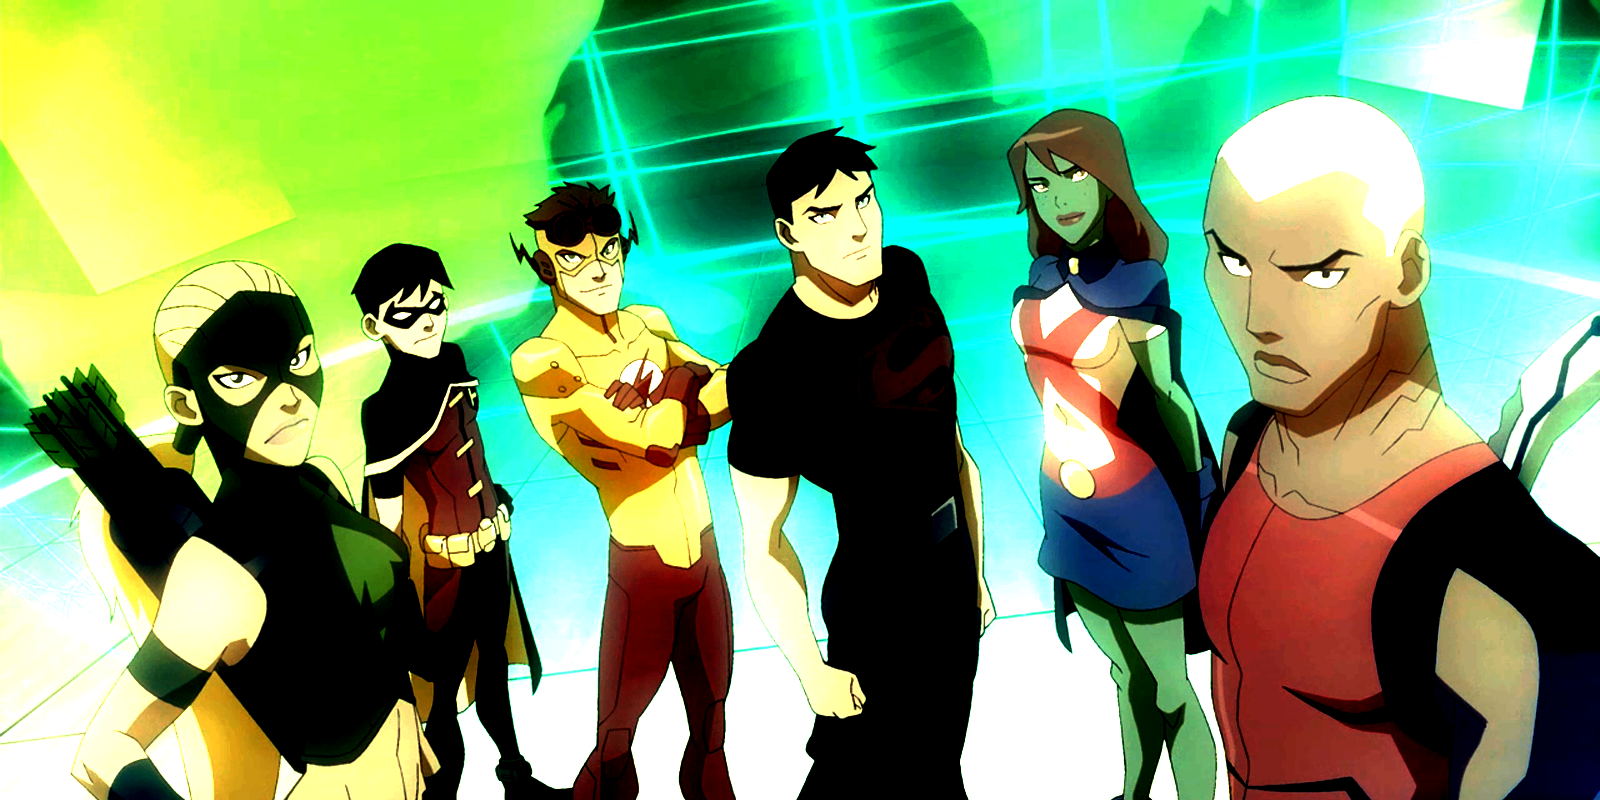 young-justice-the-team-5369367, 1387996, 1669179815, 20221123050335, 23, 11, 2022